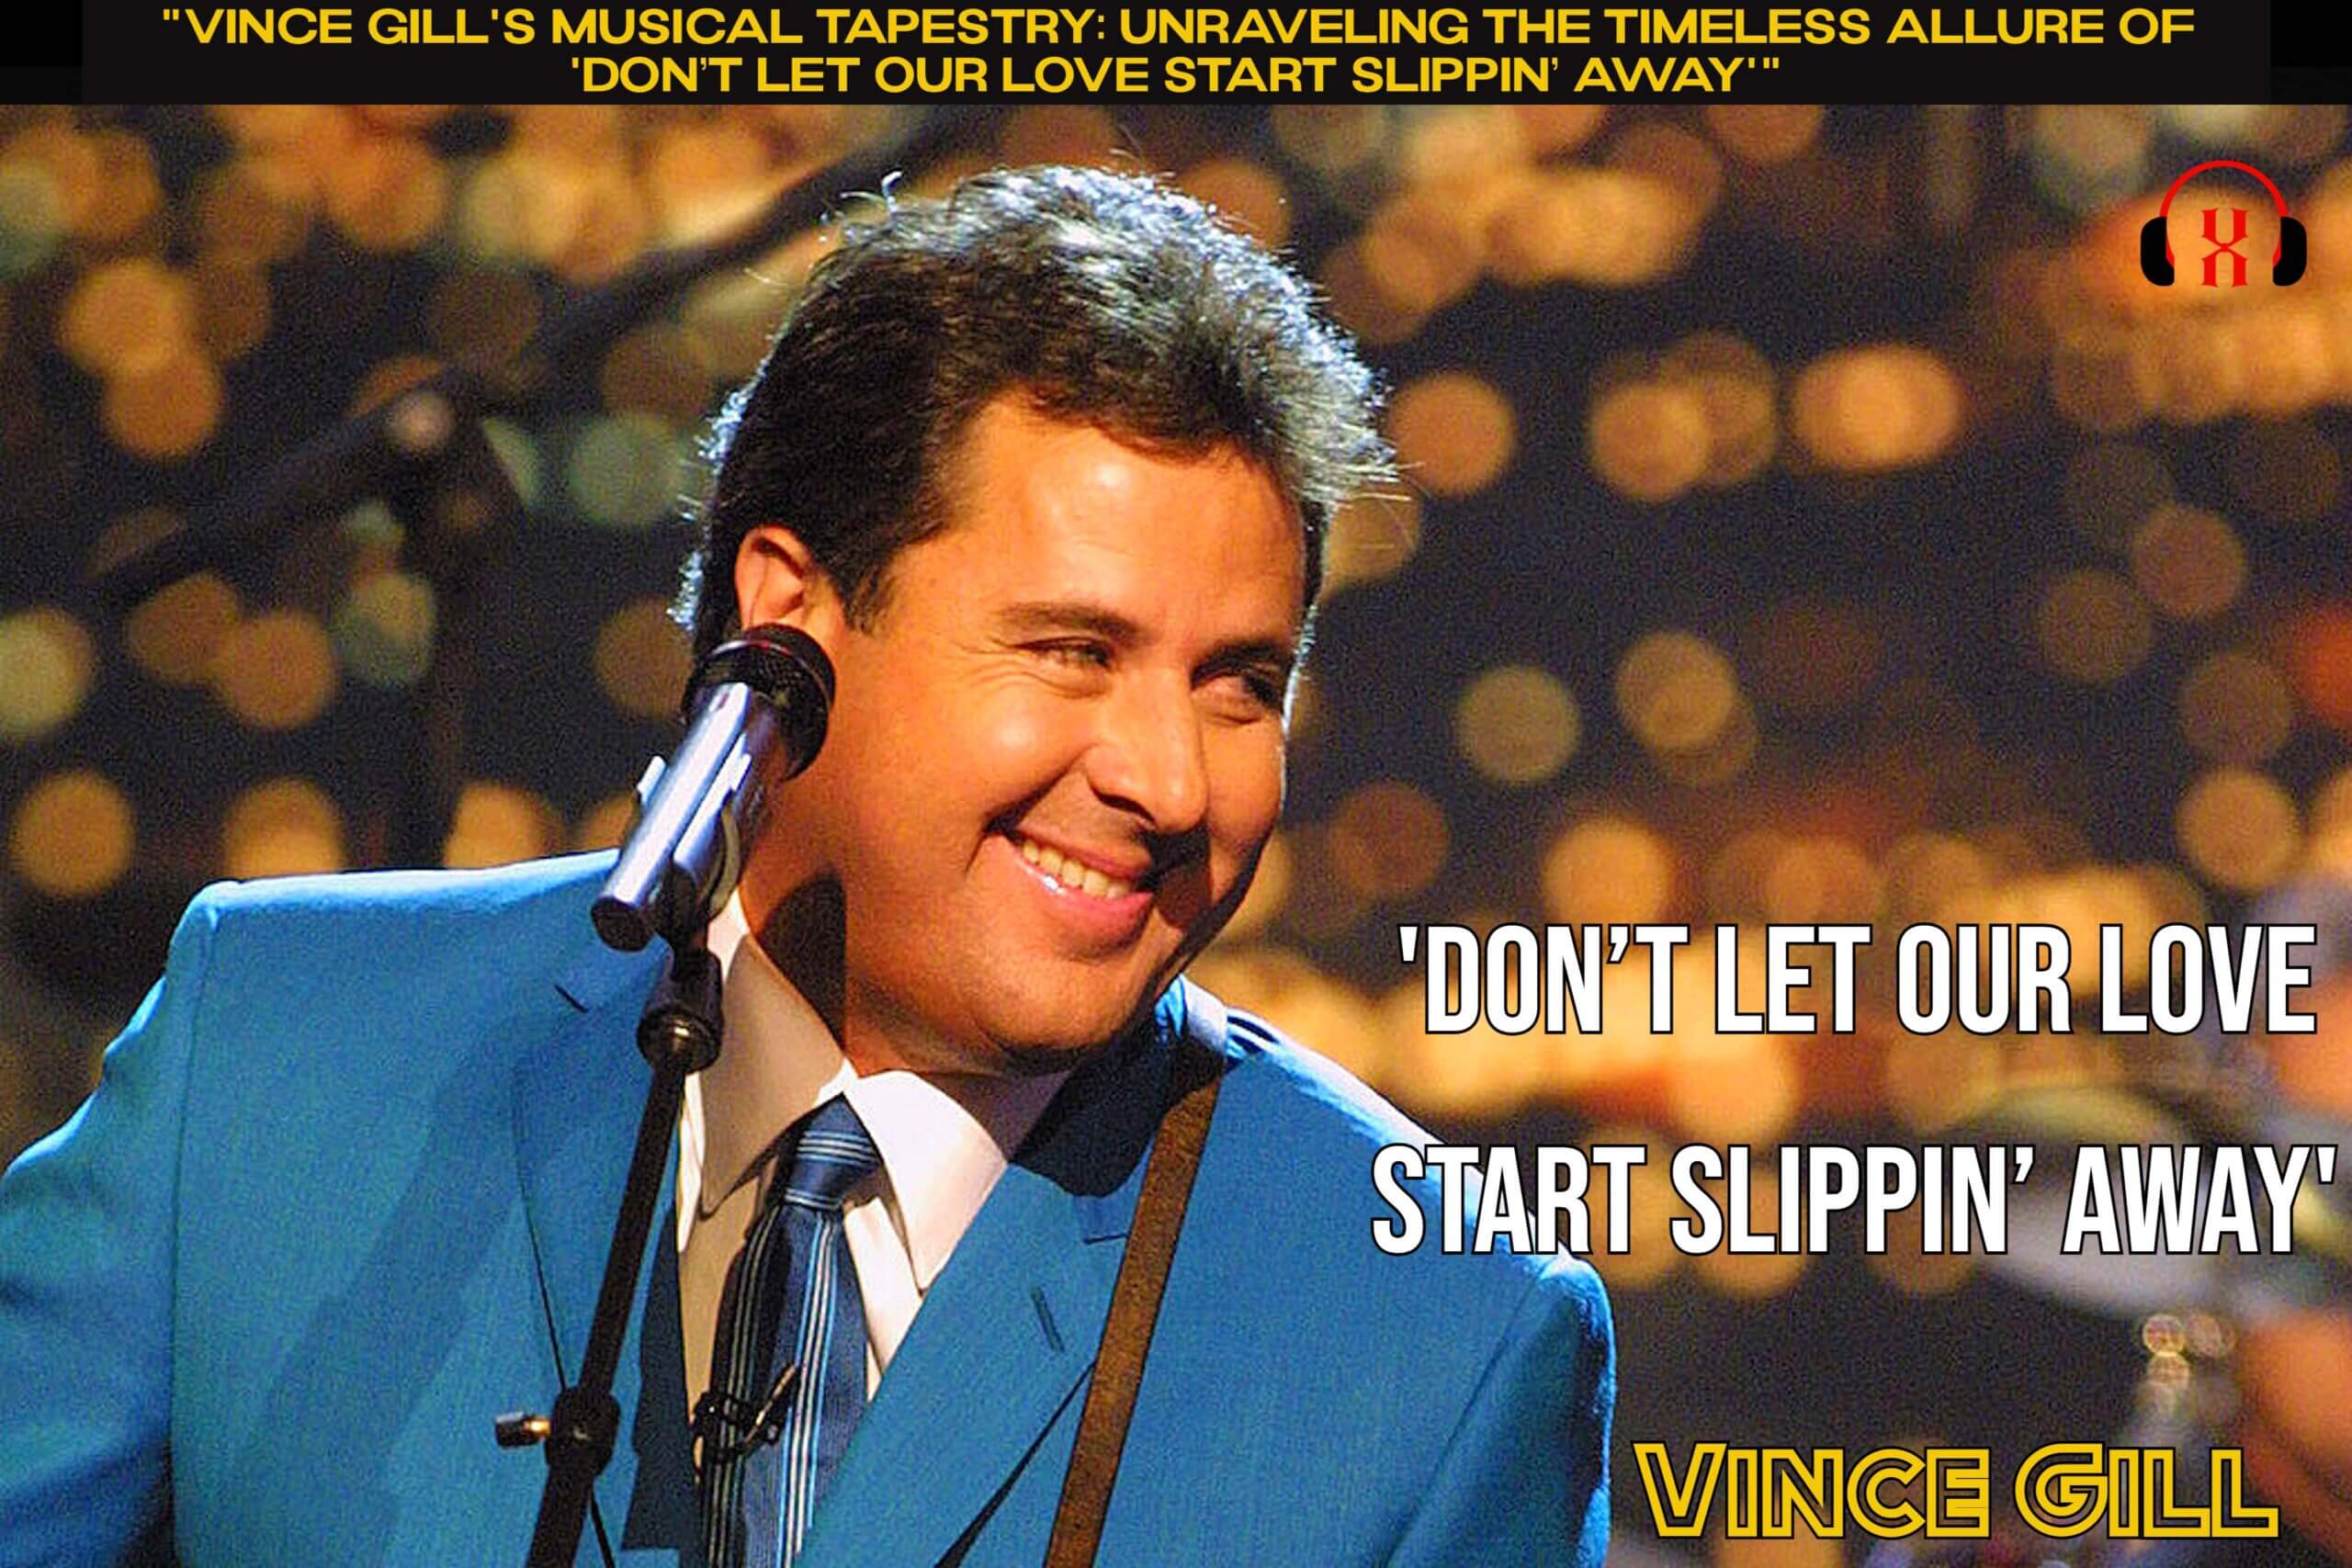 Vince gill 'Don’t Let Our Love Start Slippin’ Away